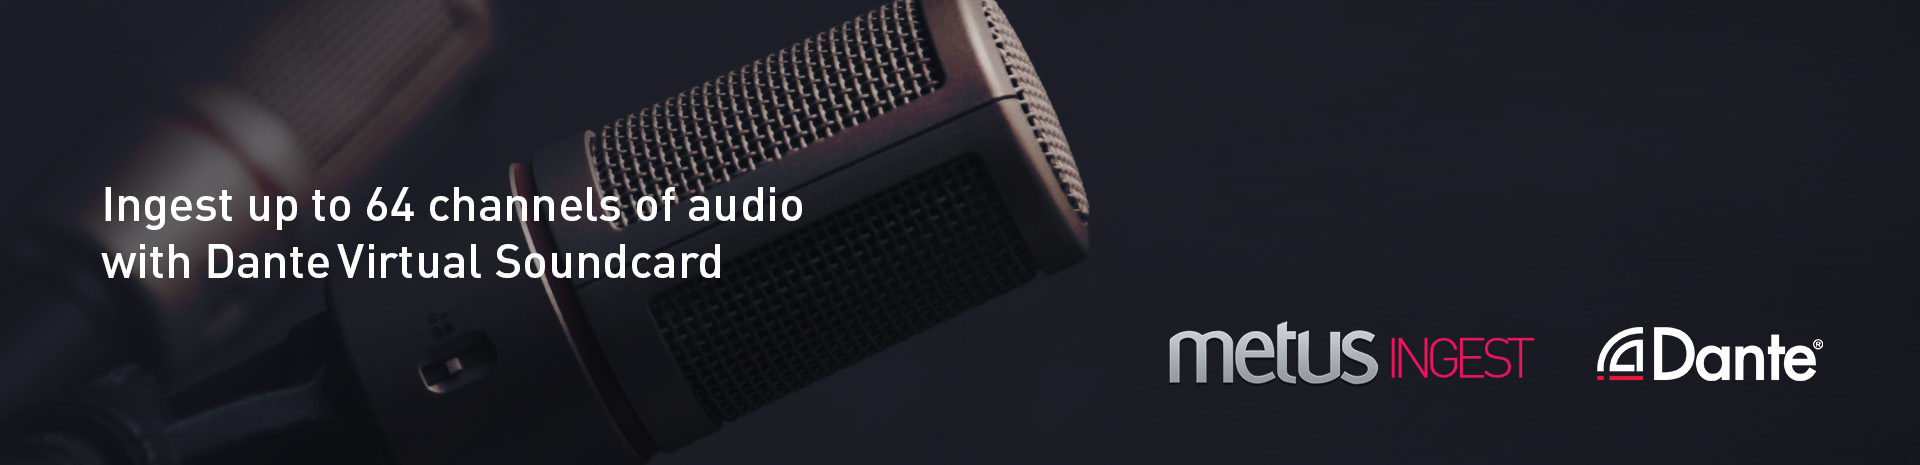 Metus INGEST Now Supports 64 Audio Channel Recording with Dante